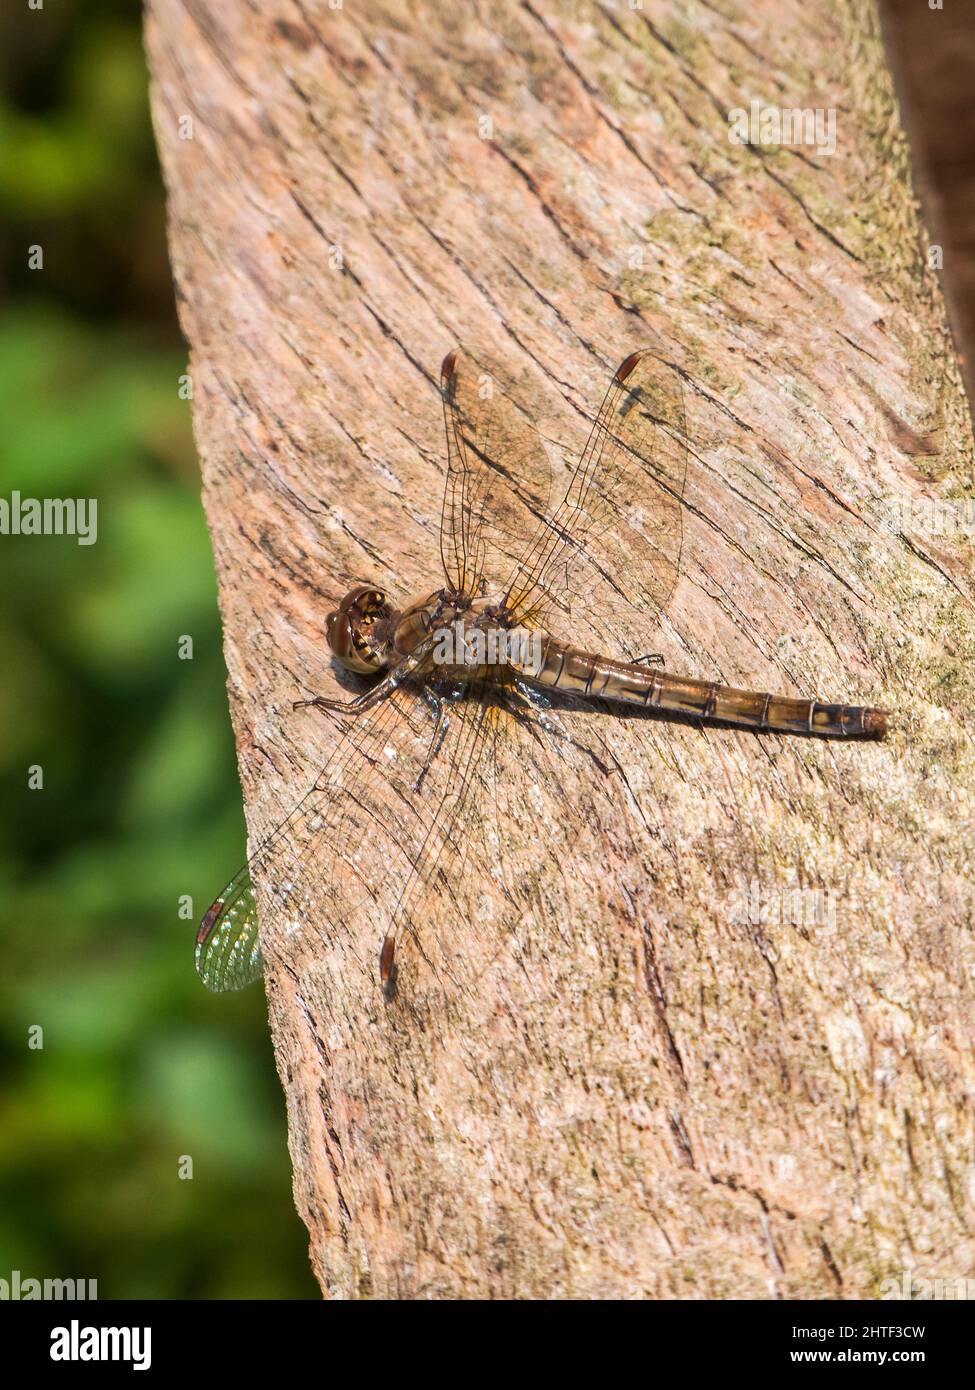 Elevated full length view of a large brown darter (lat: Sympetrum striolatum) perched on a piece of wood against a blurred natural background in autum Stock Photo